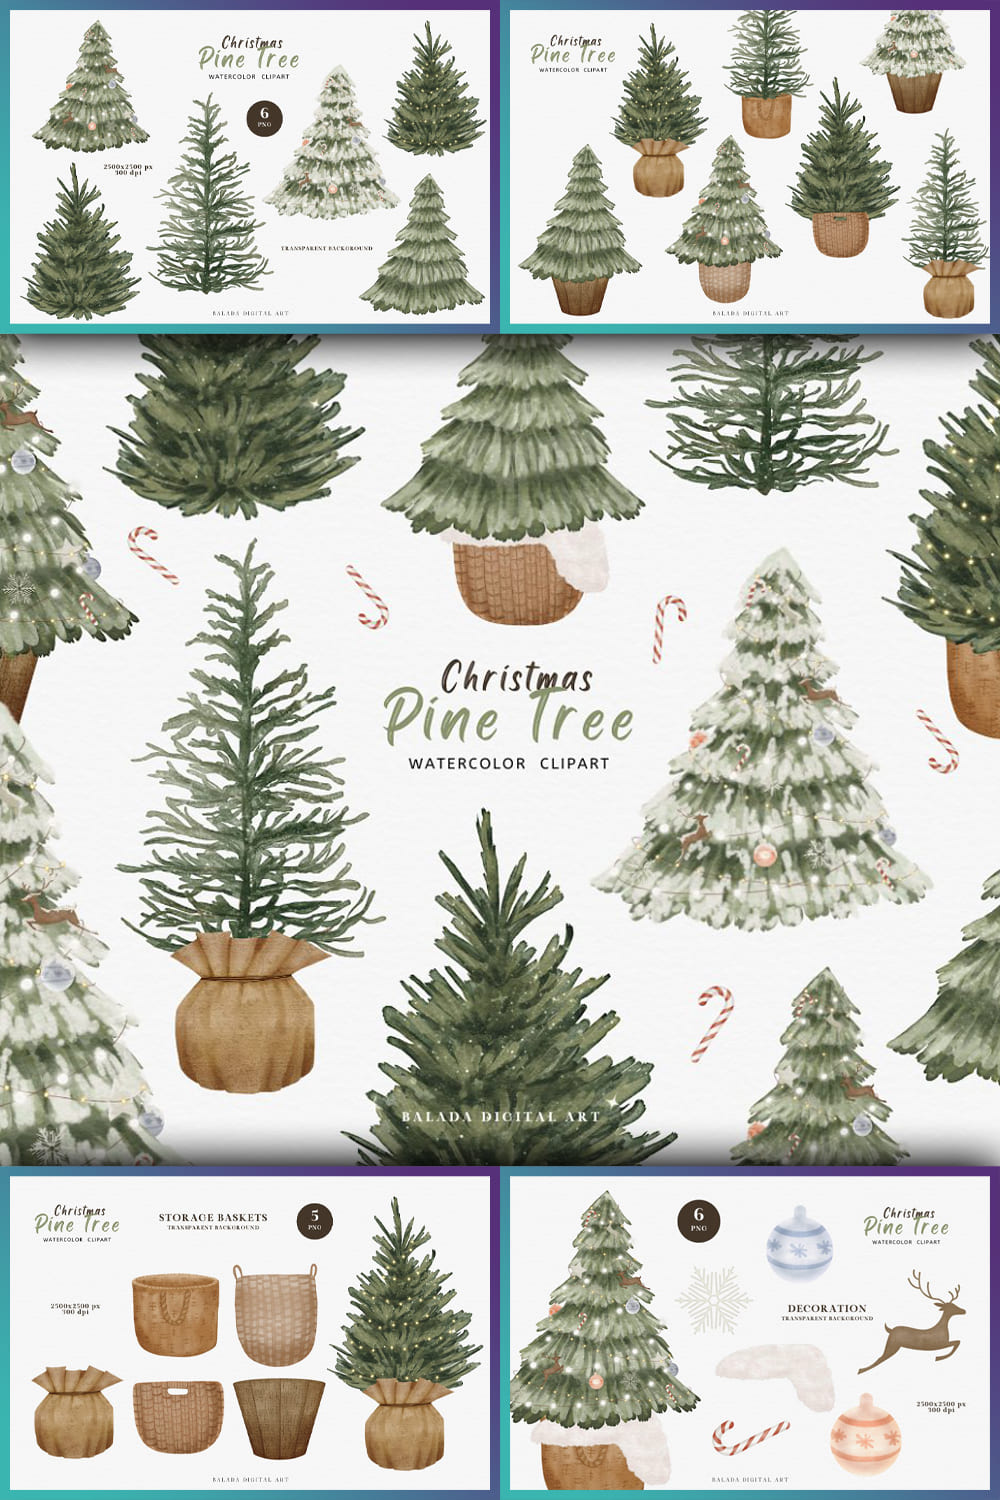 Watercolor image of Christmas trees to create a Christmas atmosphere.